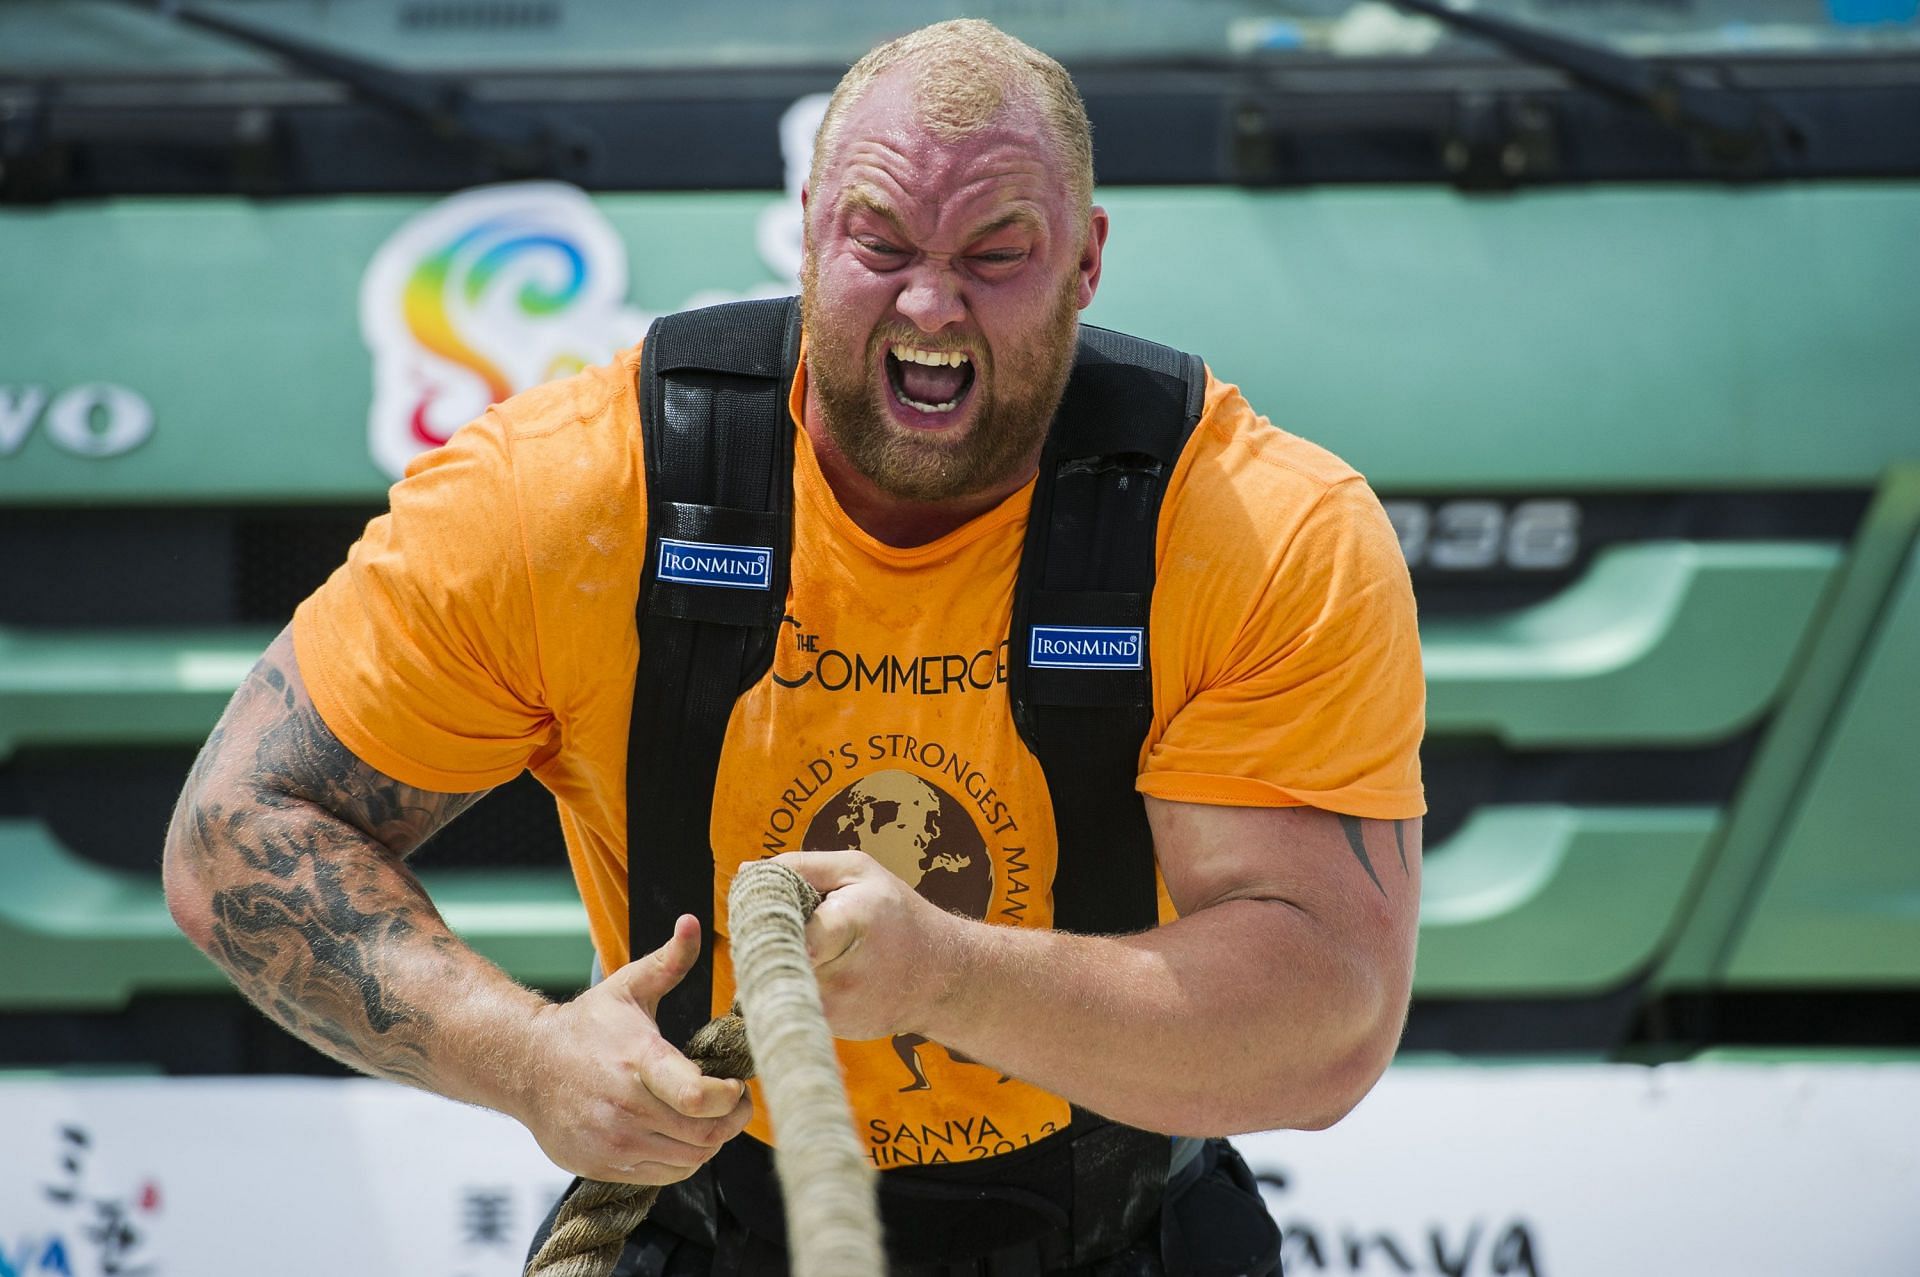 Hafthor Bjornsson has showcased some explosive training ahead of his return to the ring